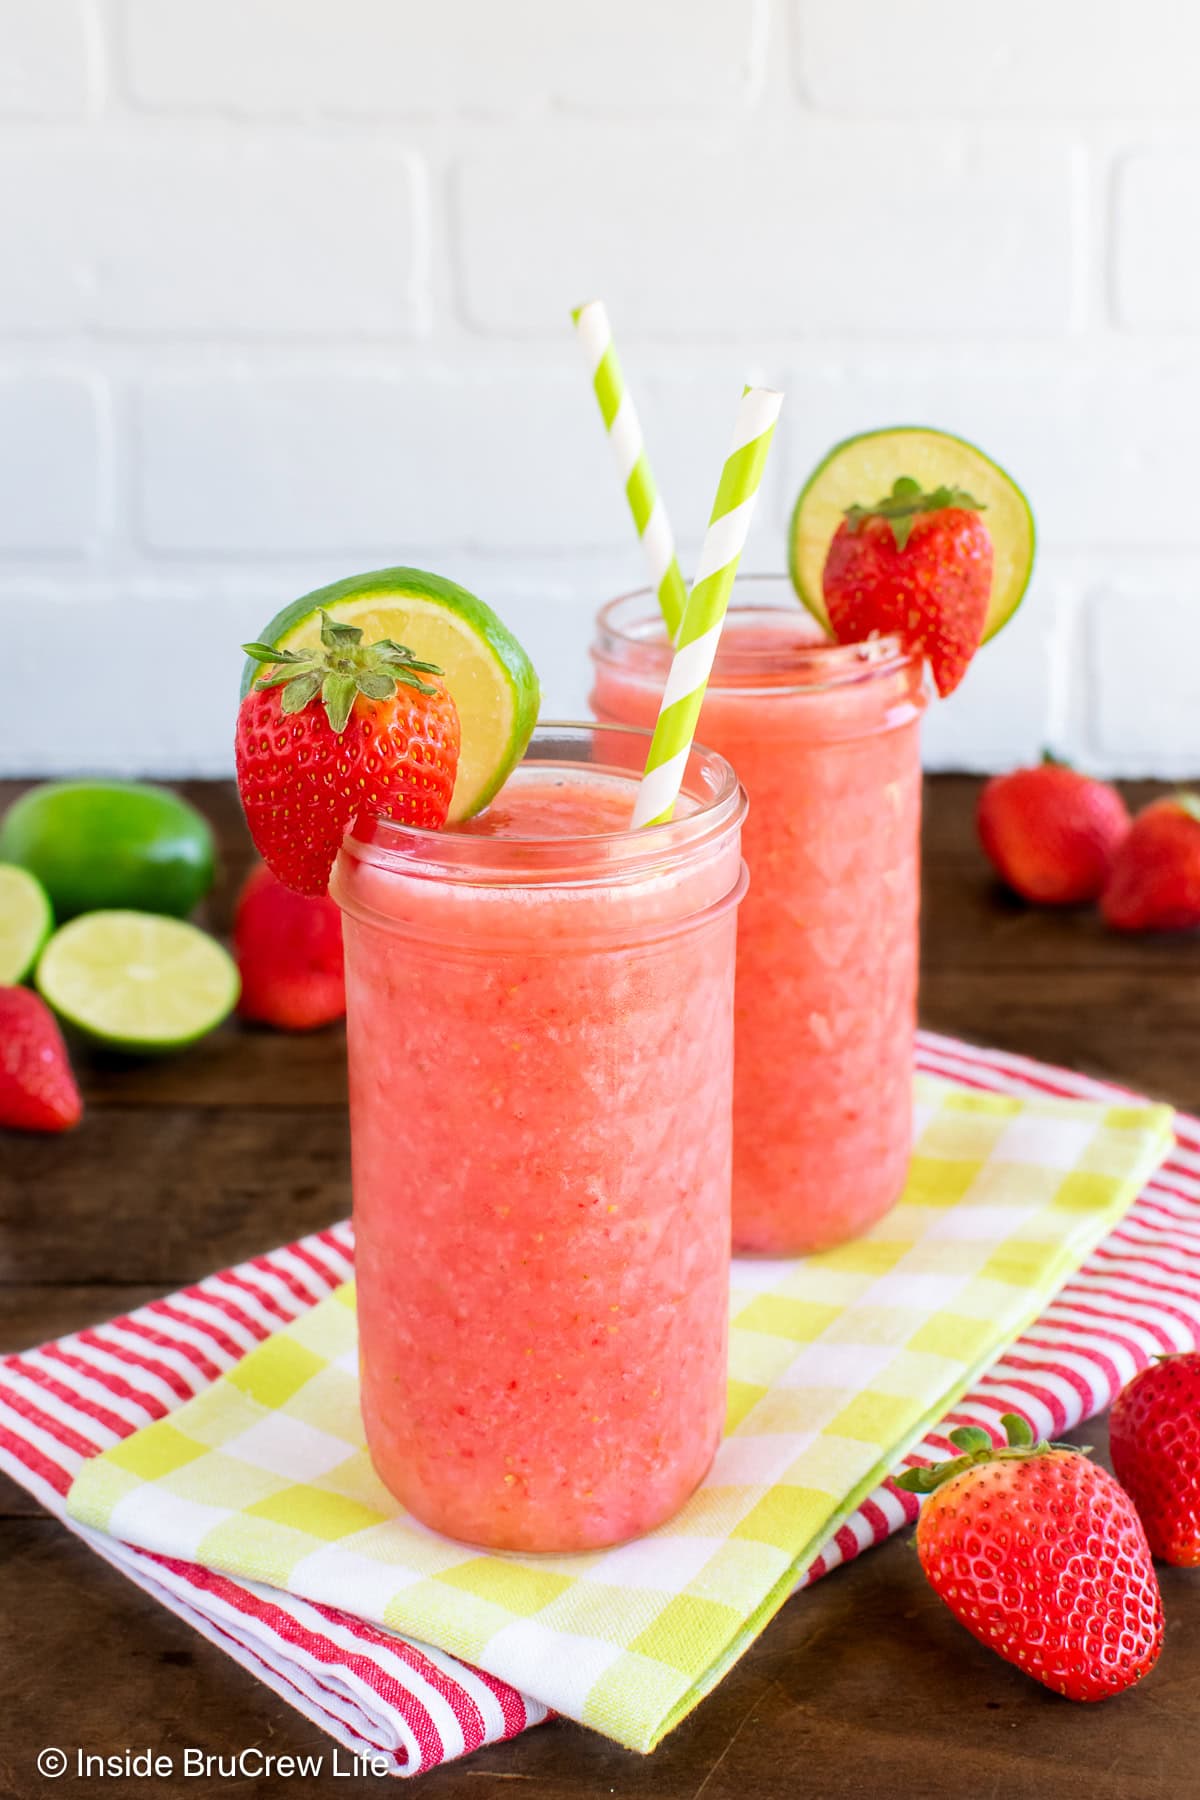 Two glass cups filled with a strawberry drink and straws.